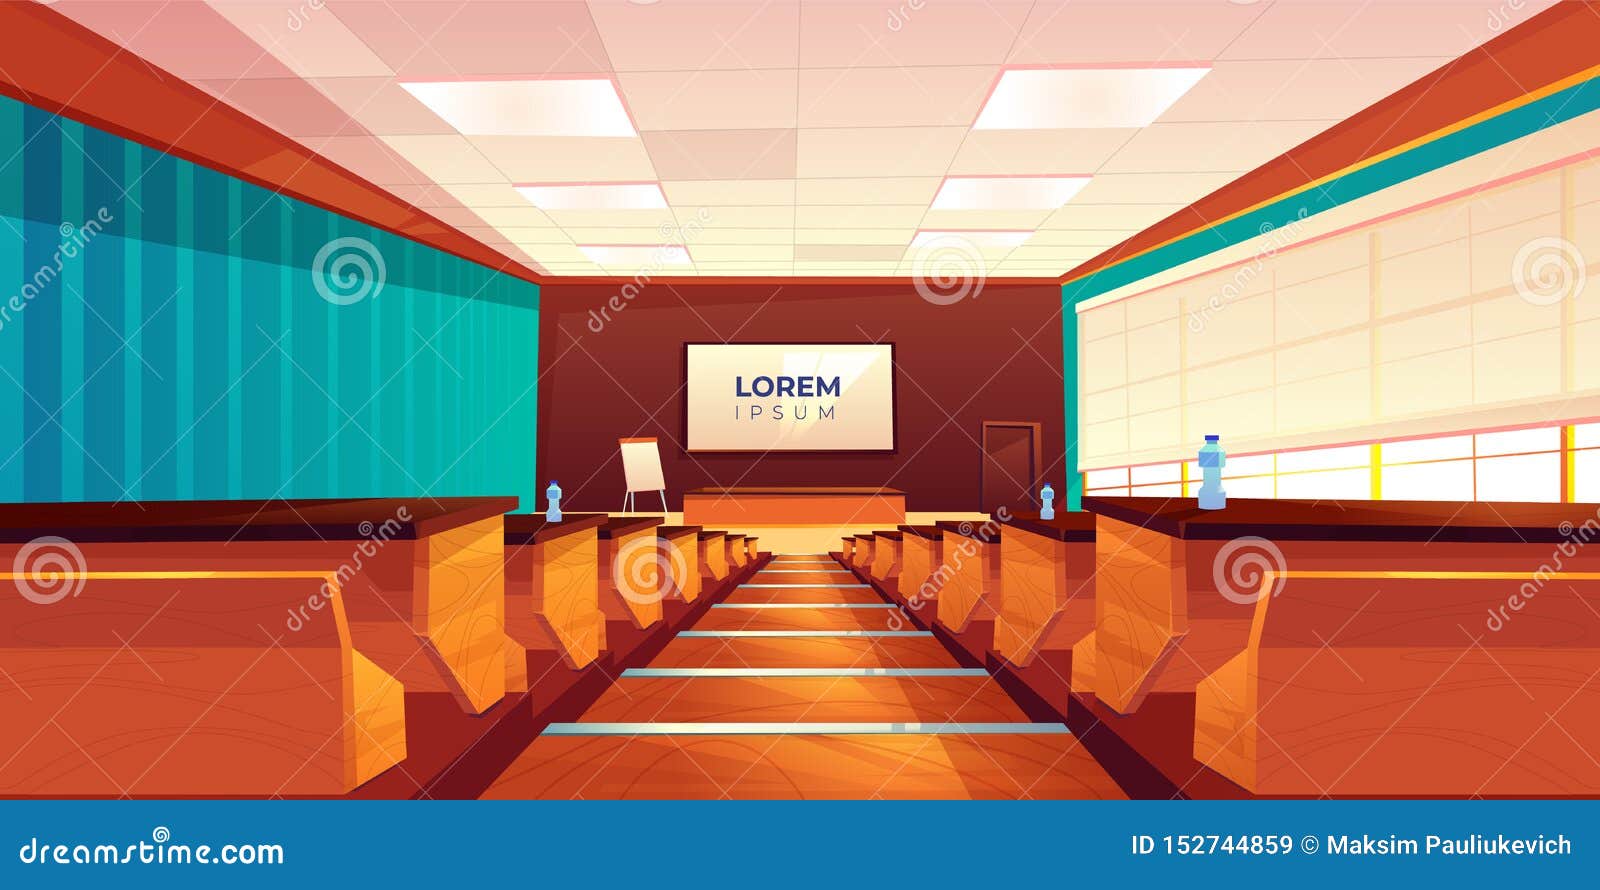 empty auditorium, lecture hall or meeting room